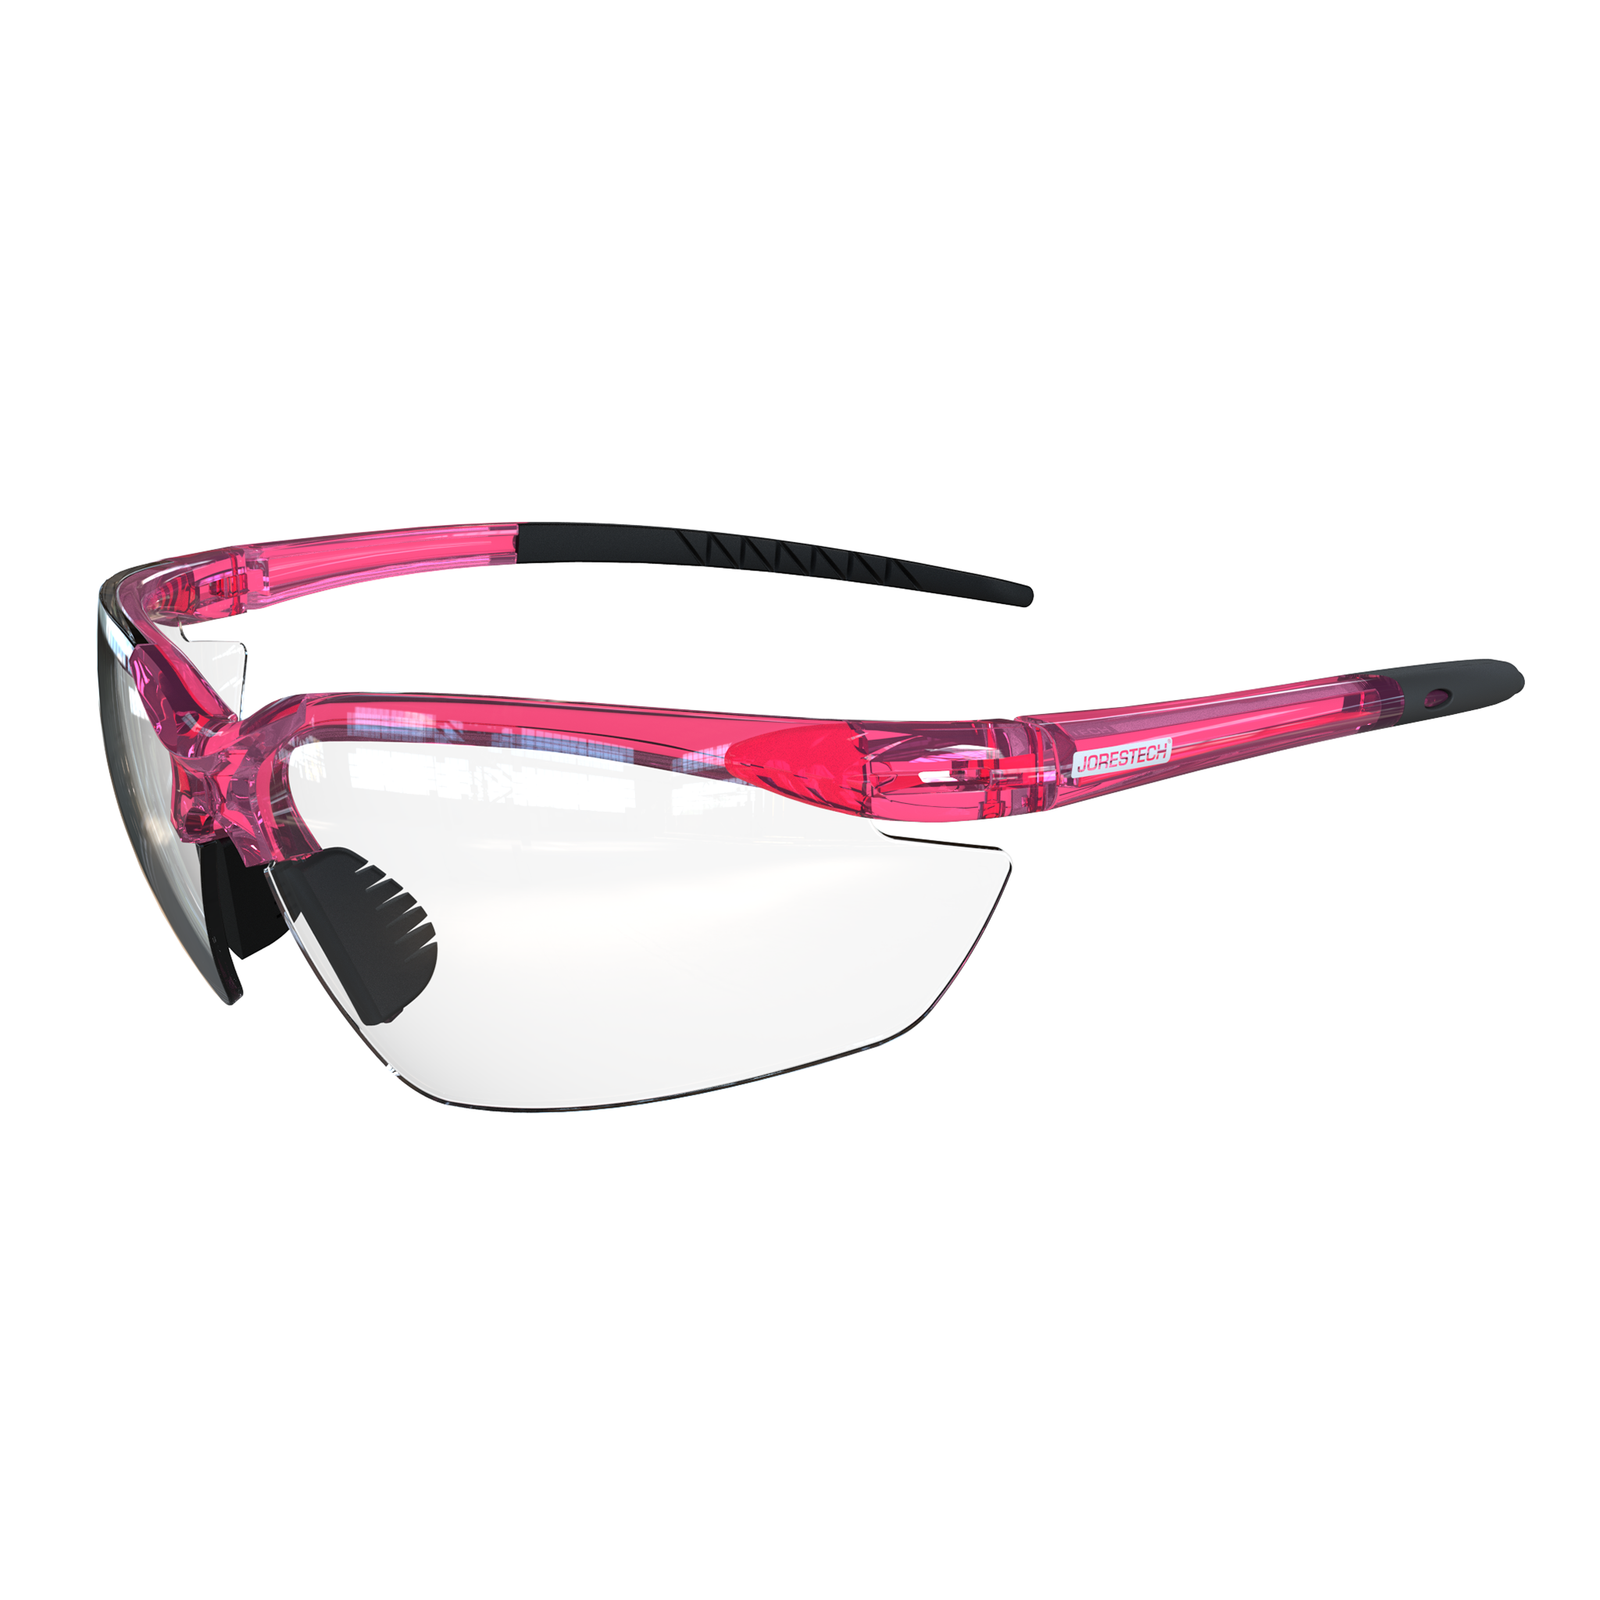 High performance polycarbonate clear lenses with pink temples for eye protection